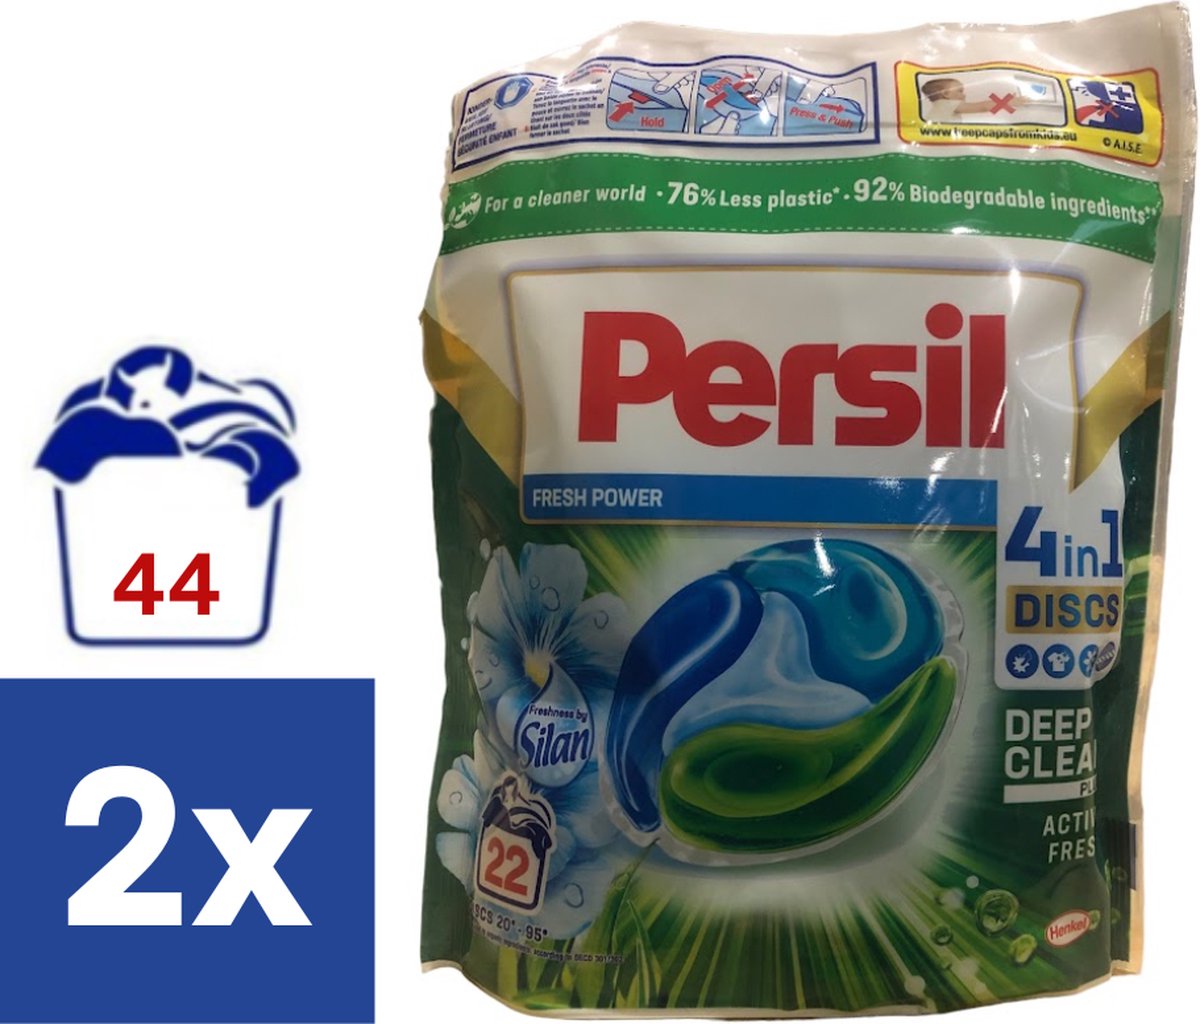 Persil 4in1 Pods Freshness by Silan - 2 x 22 pods